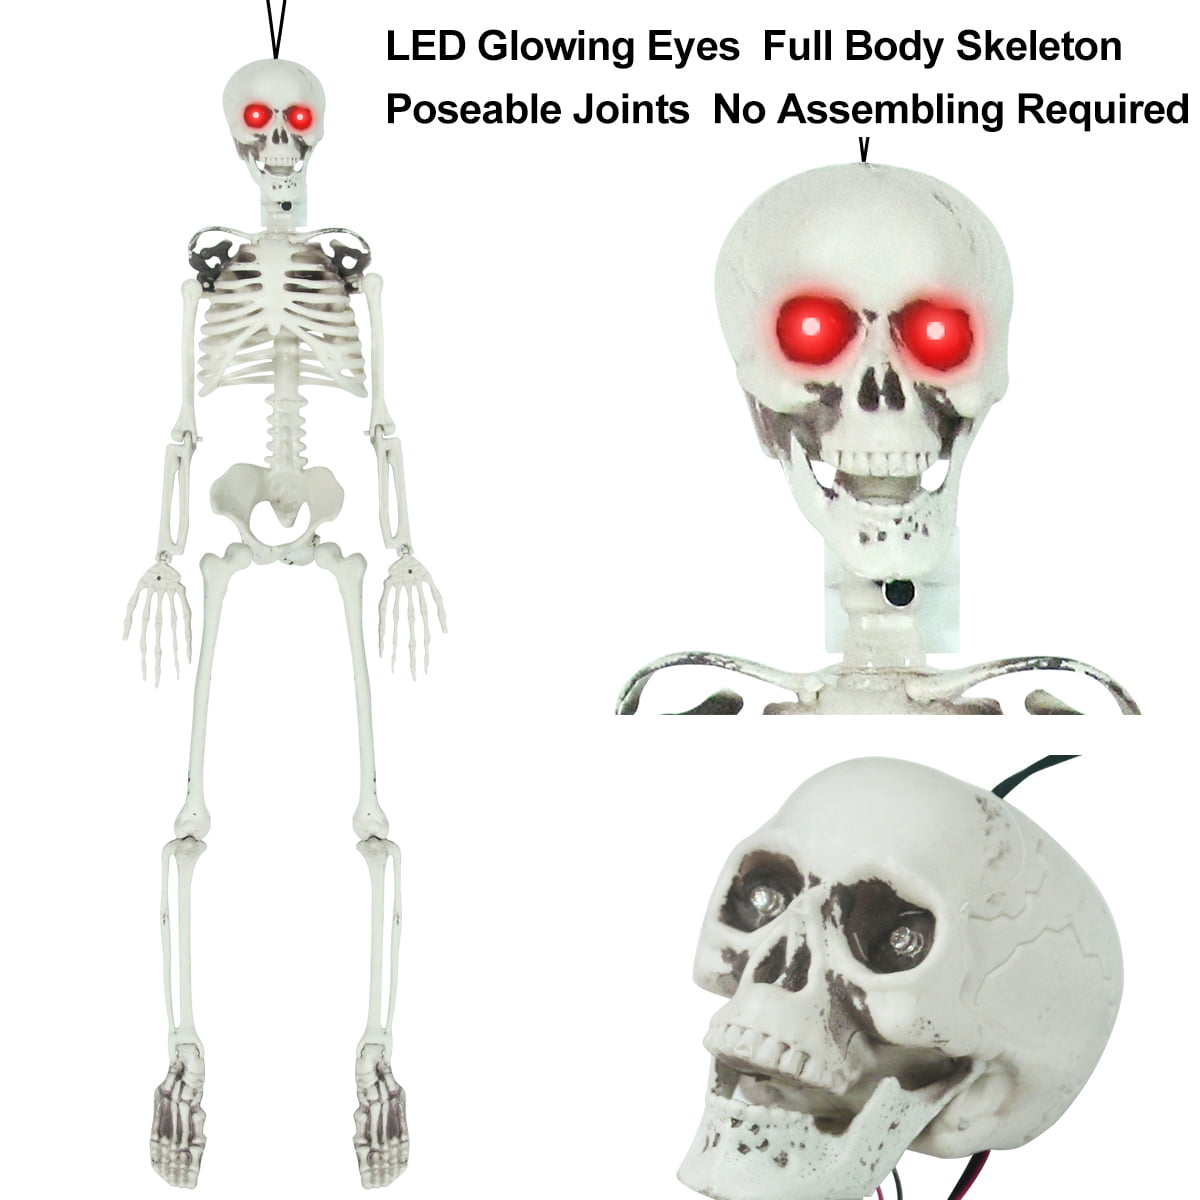 Sound Activated Halloween LED Skeleton Decorations 3FT Halloween Hanging Posable Skeleton Large Life-size Halloween Prop Skull with LED Glowing Eyes and Creepy Shrilling Sound 